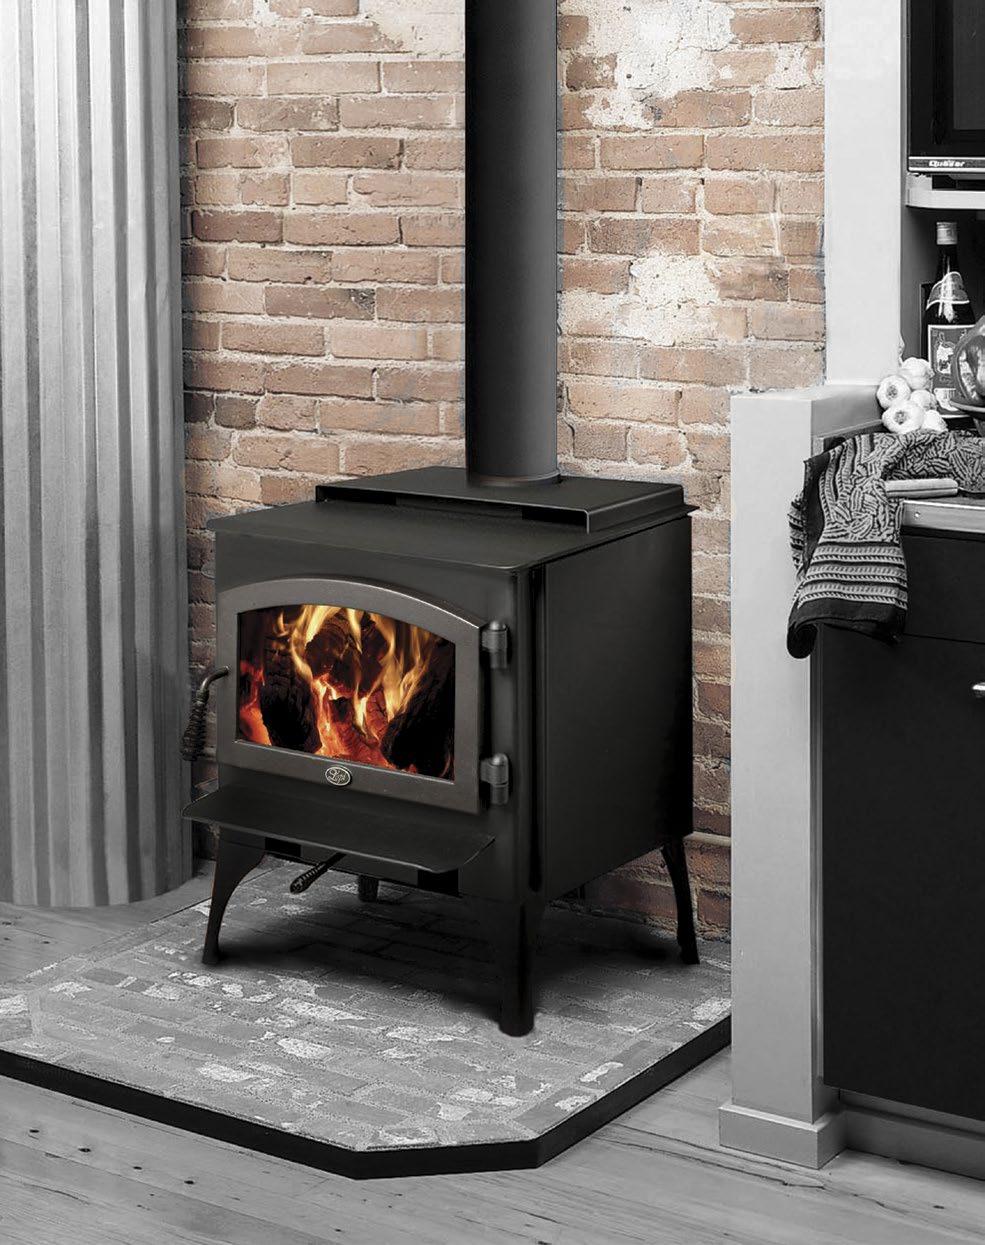 Republic 1750 The Republic 1750 wood stove offers the classic Lopi look with a radiant surface for cooking and a convection surface for warming, and it packs a powerful punch.